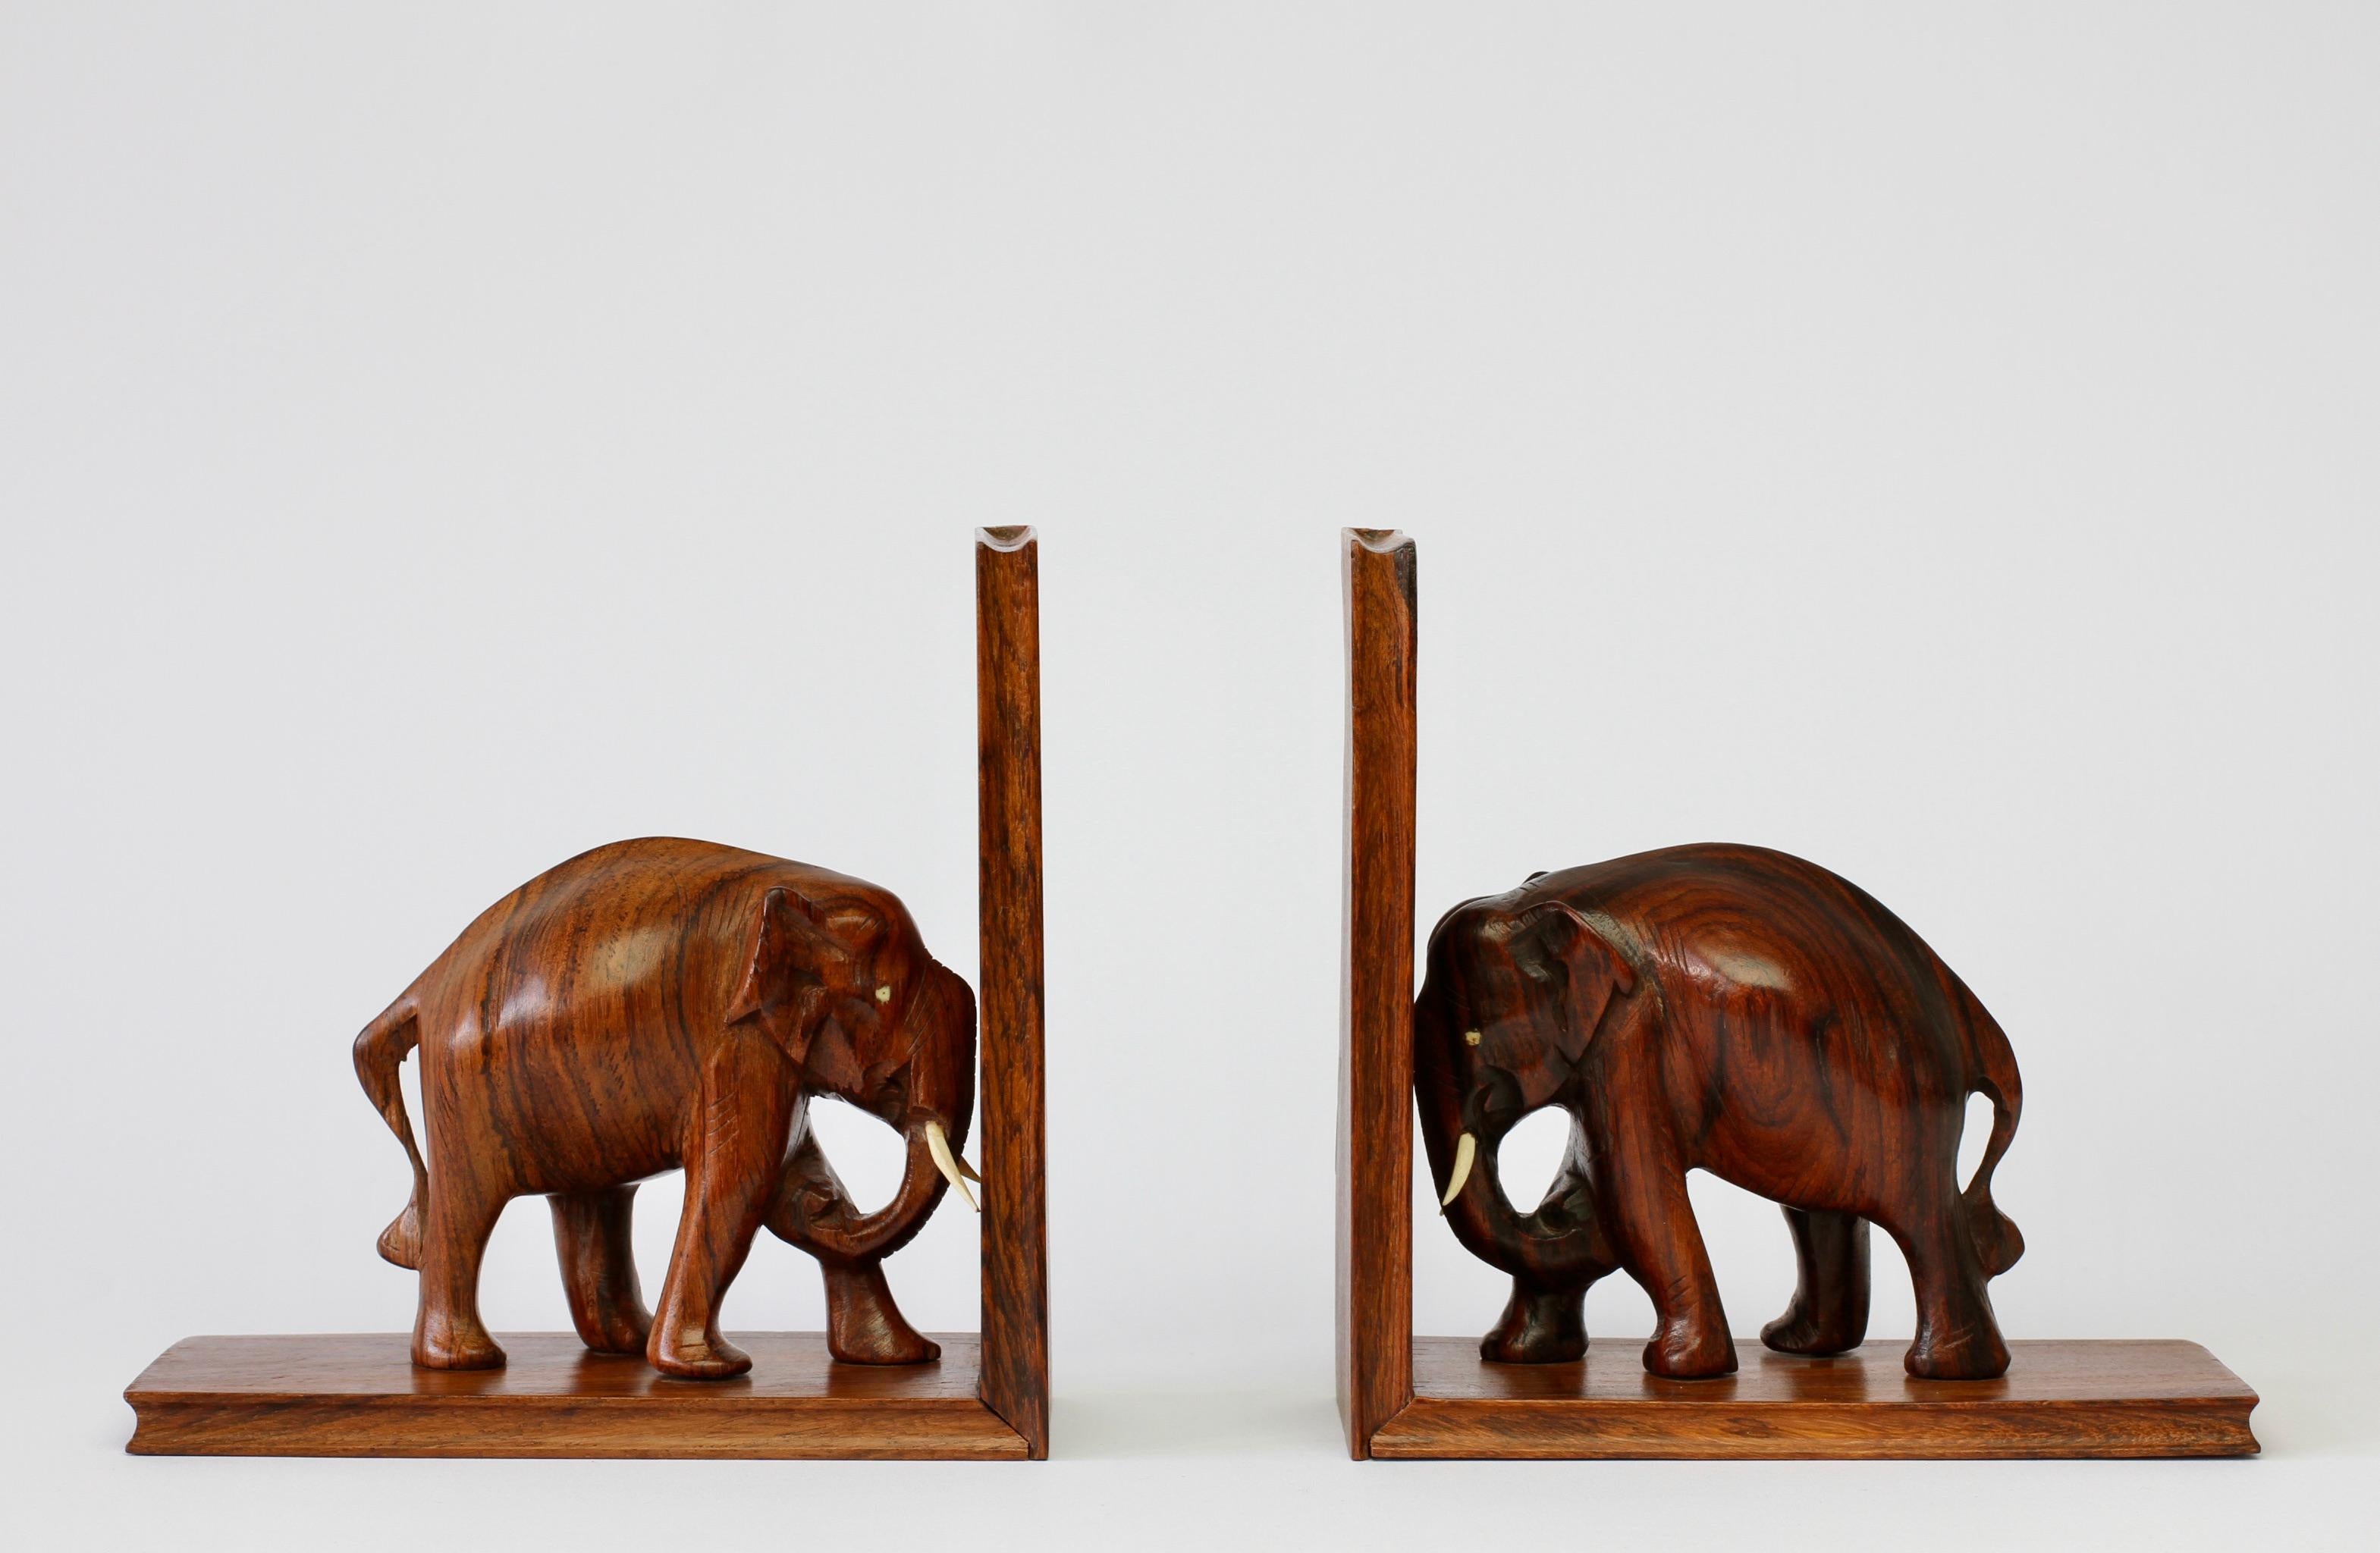 Vintage midcentury wooden bookends with carved elephant sculptures / carvings - probably Indian in origin and made, circa 1960s. Beautifully shaped and hand carved. These would also sit well within any Scandinavian or Mid-Century Modern inspired